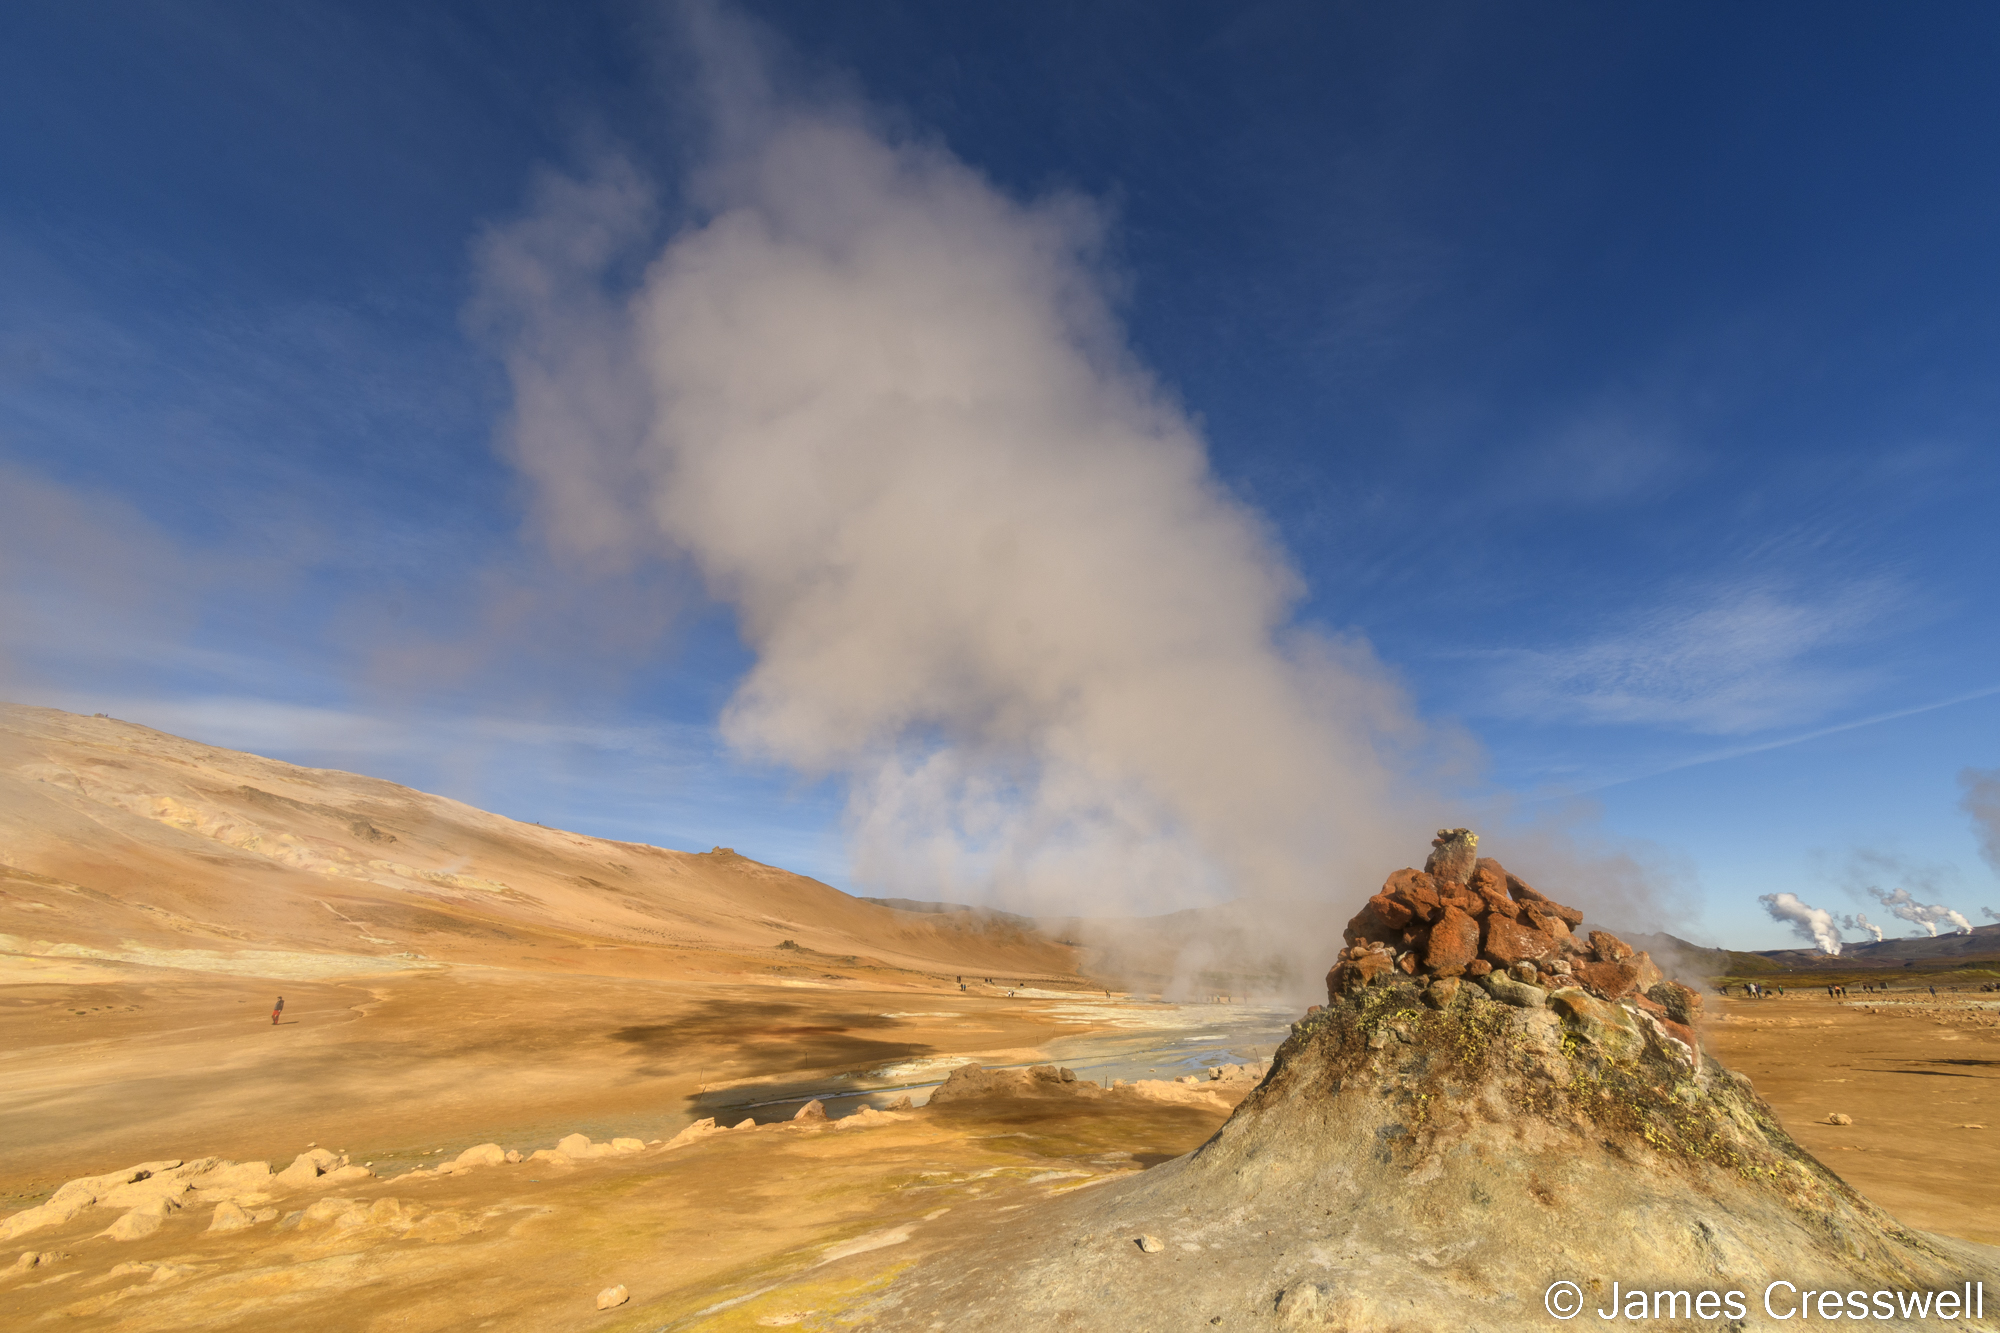 A landscape view with a steaming fumarole in the foreground